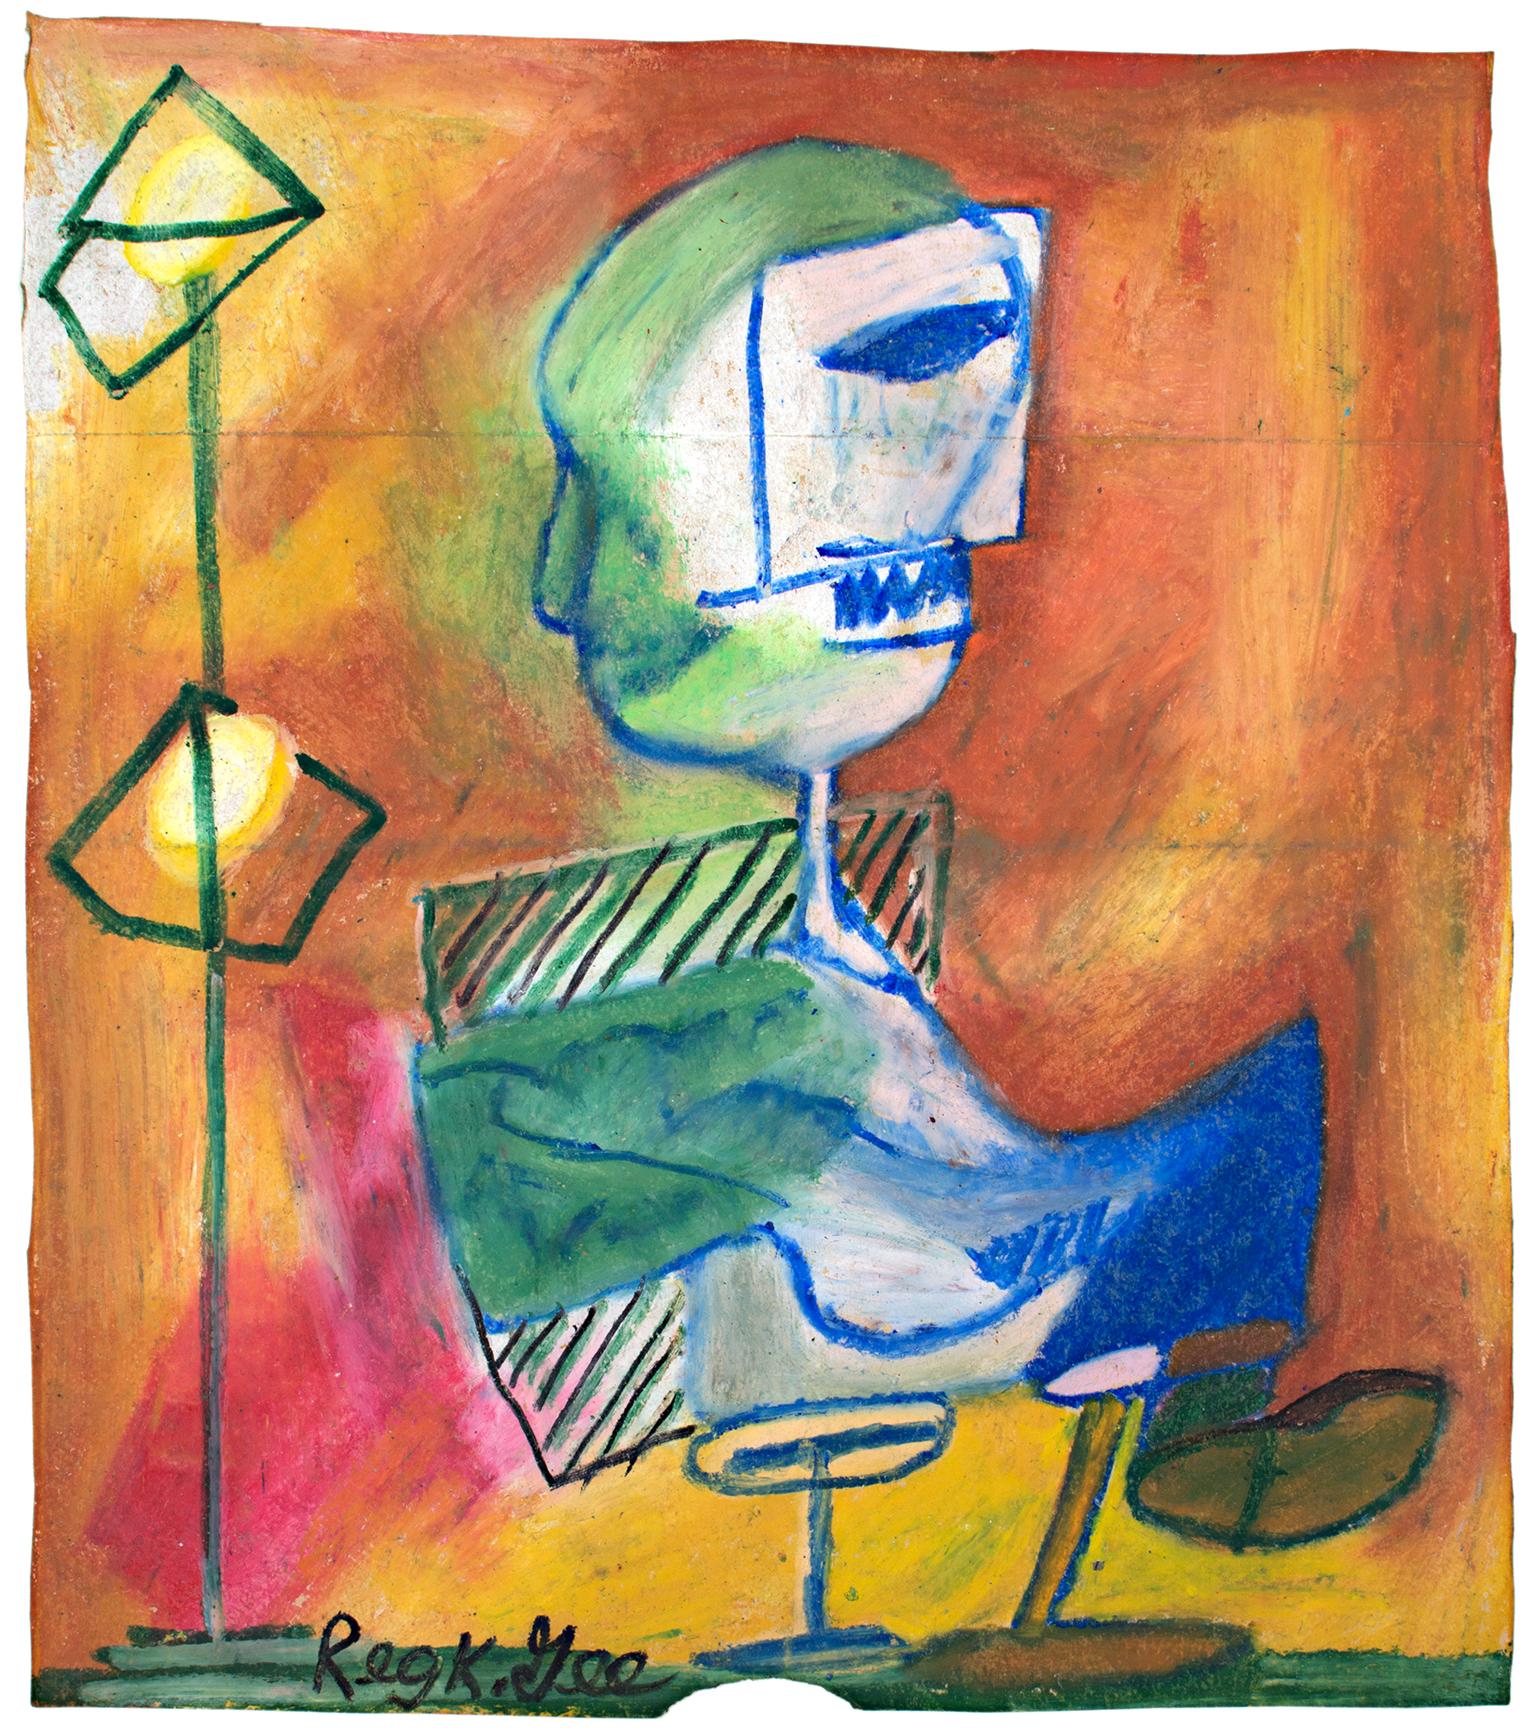 "Seated Figure in Studio" is an original oil pastel drawing on a Safeway grocery bag by Reginald K. Gee. The artist signed the piece lower left. It features an abstracted figure seated in a warmly-lit room. The figure is blue, green, and white, and